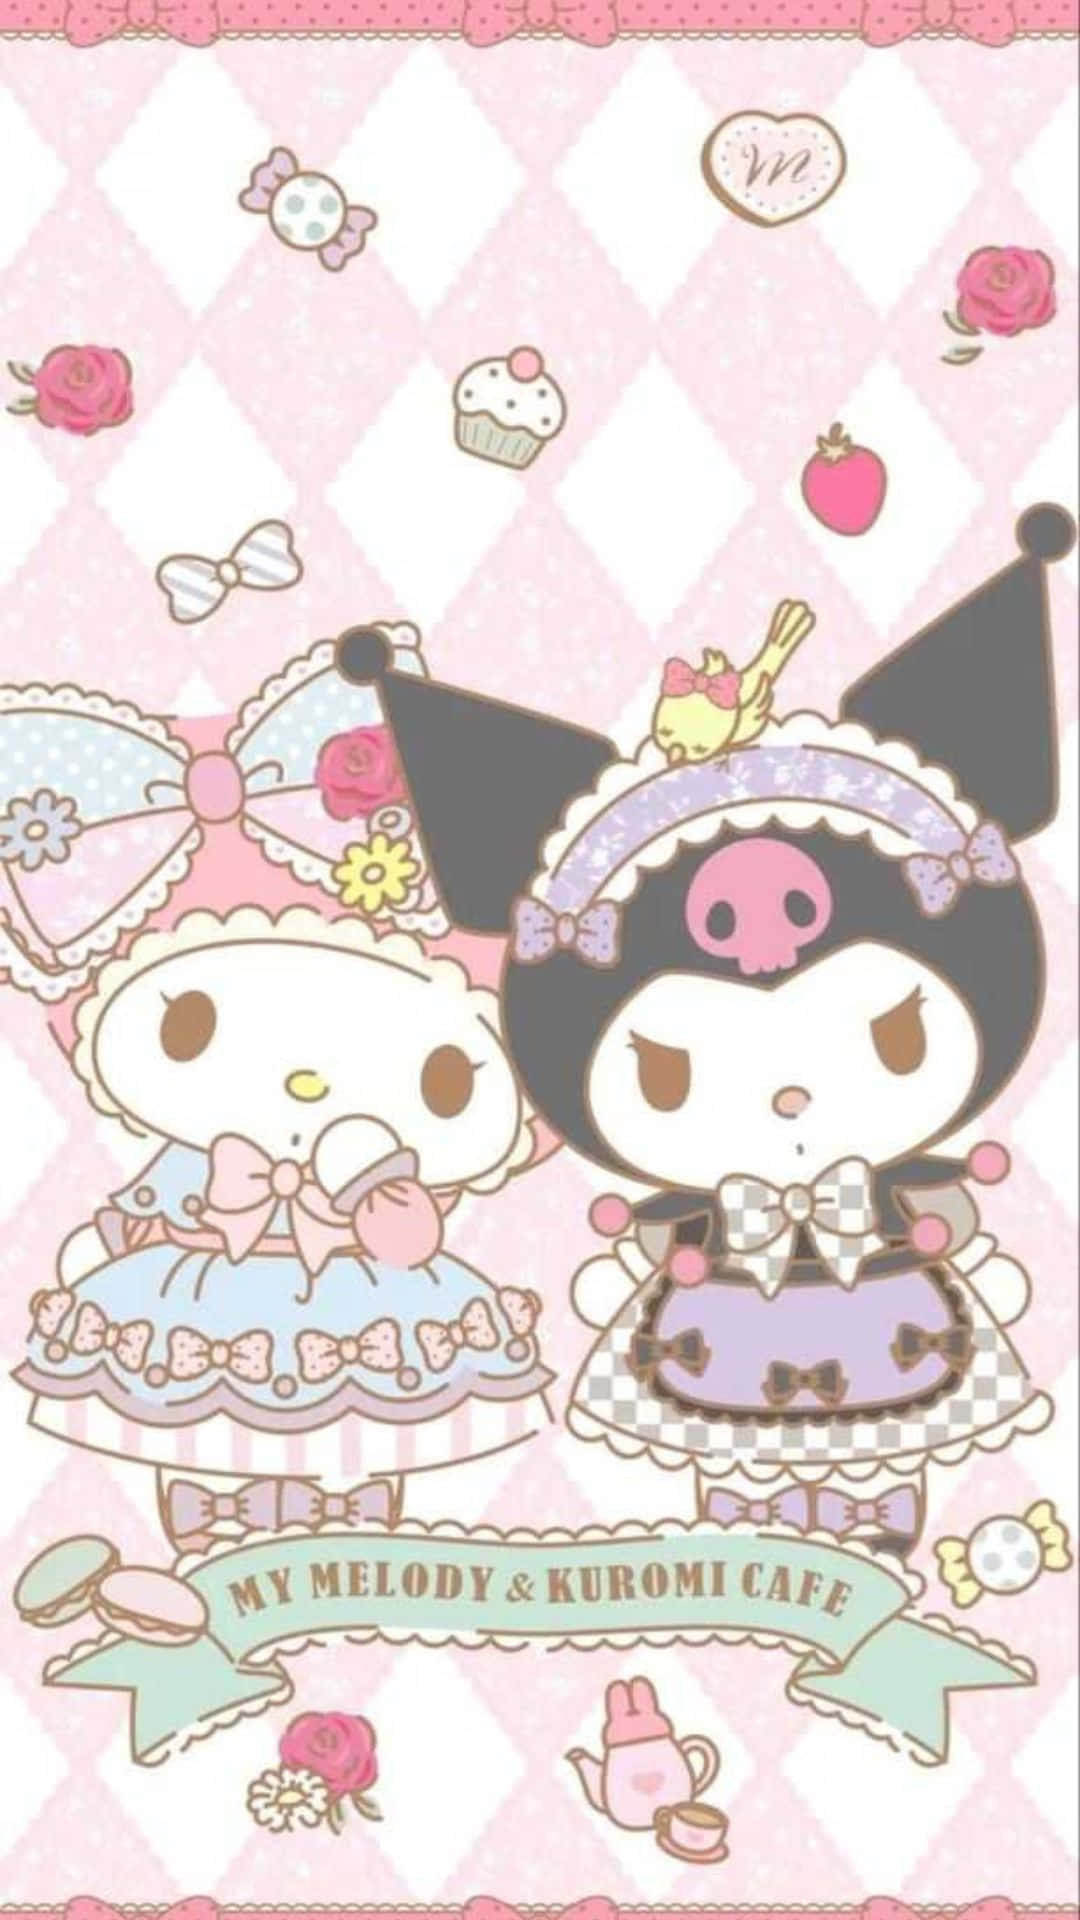 Kuromi and My Melody enjoying a playful moment together Wallpaper